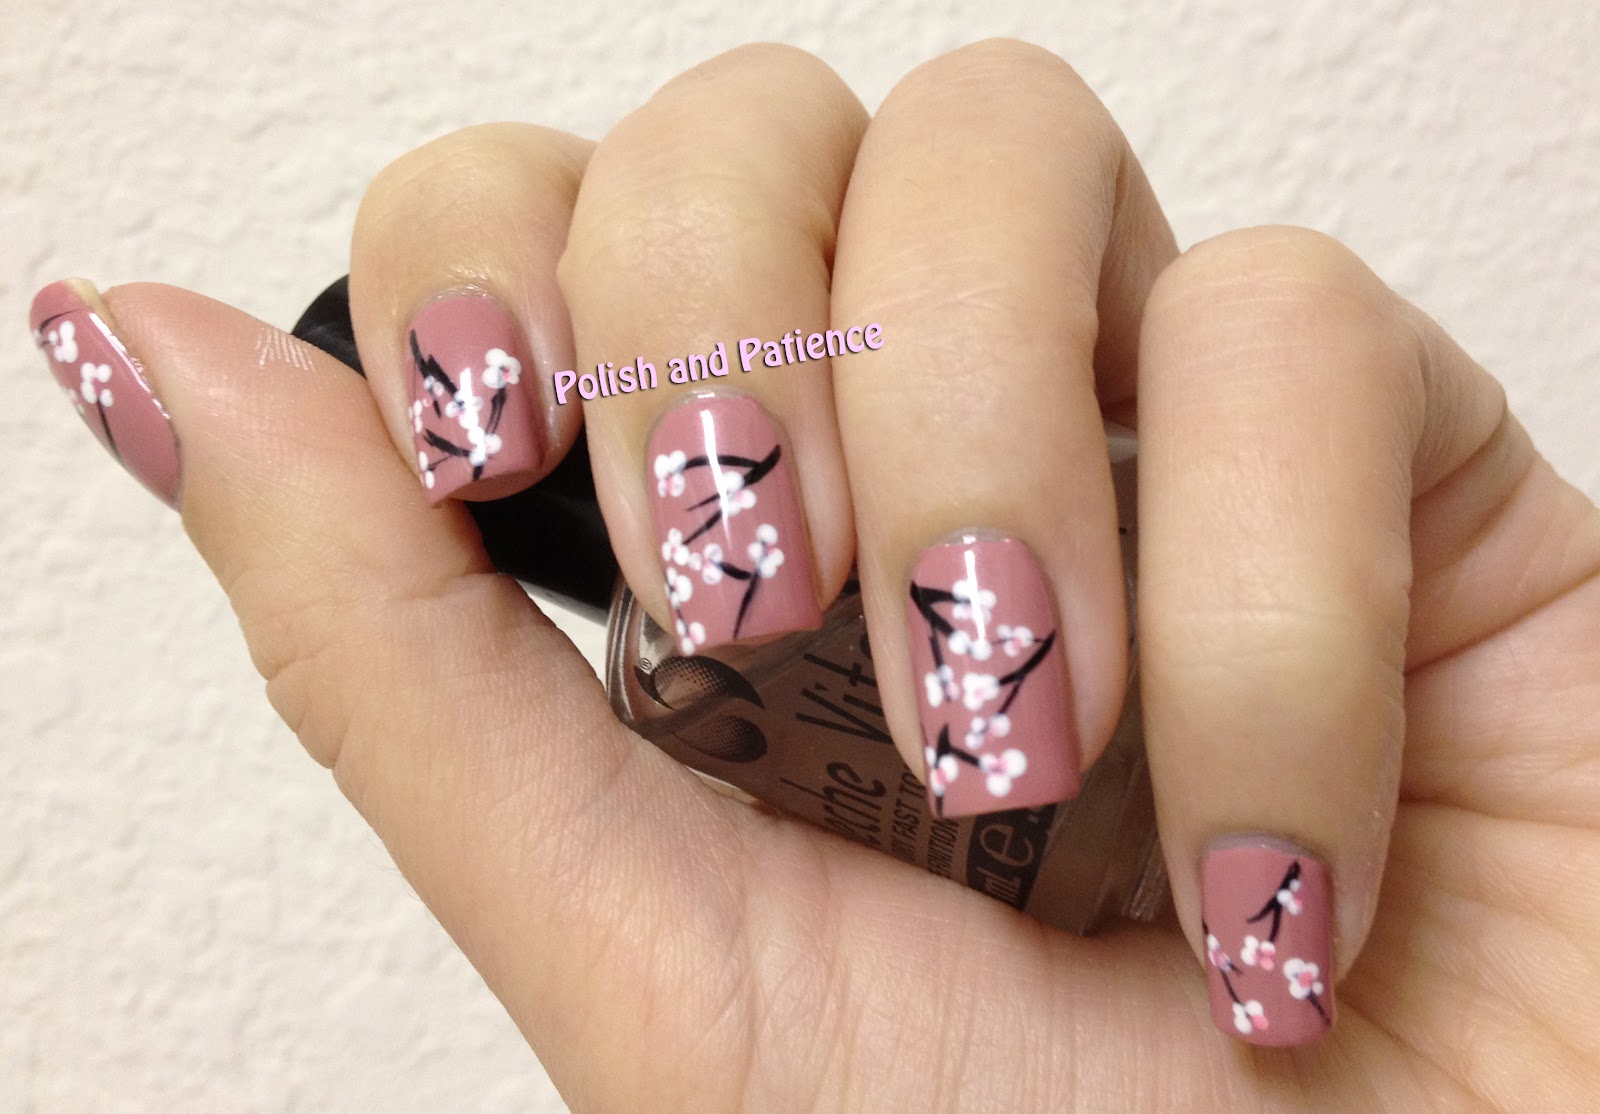 4. Cherry Blossom Nails - wide 8